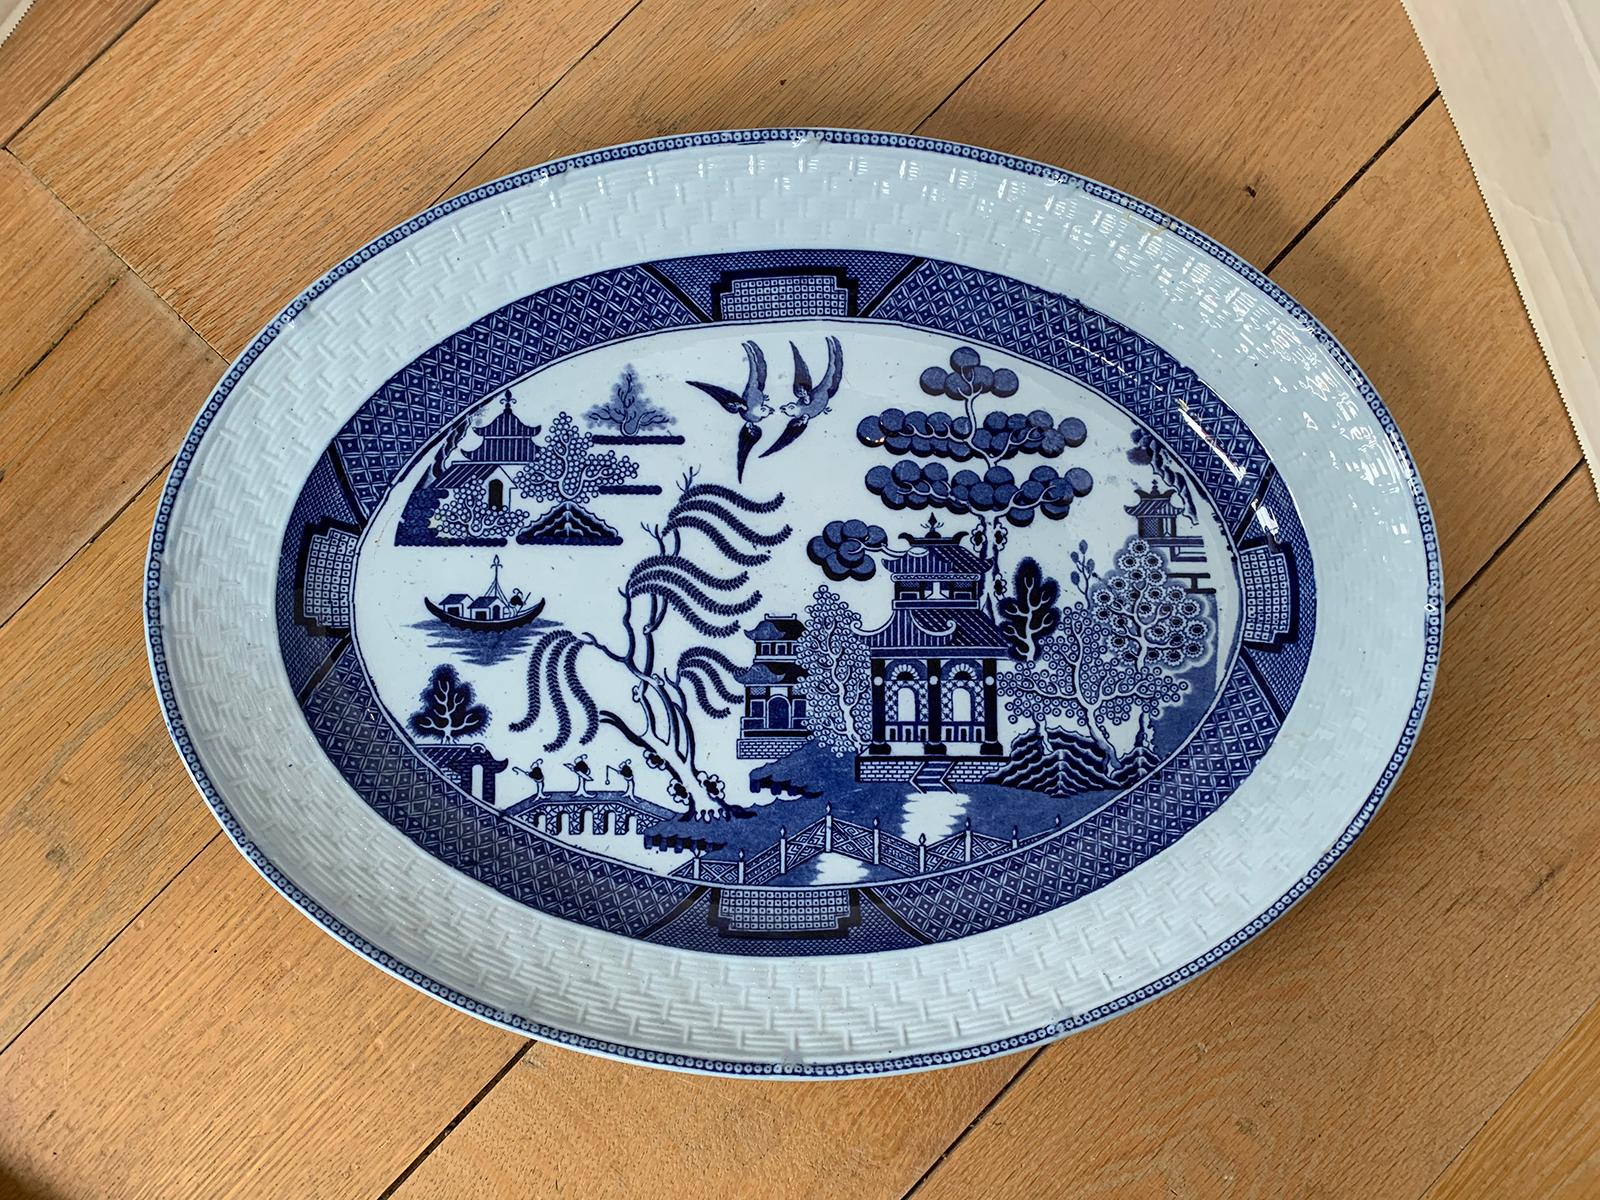 Late 19th century circa 1870s oval blue willow porcelain charger with basket weave border, by T.C. Brown-Westhead Moore & Co. Impressed marks.